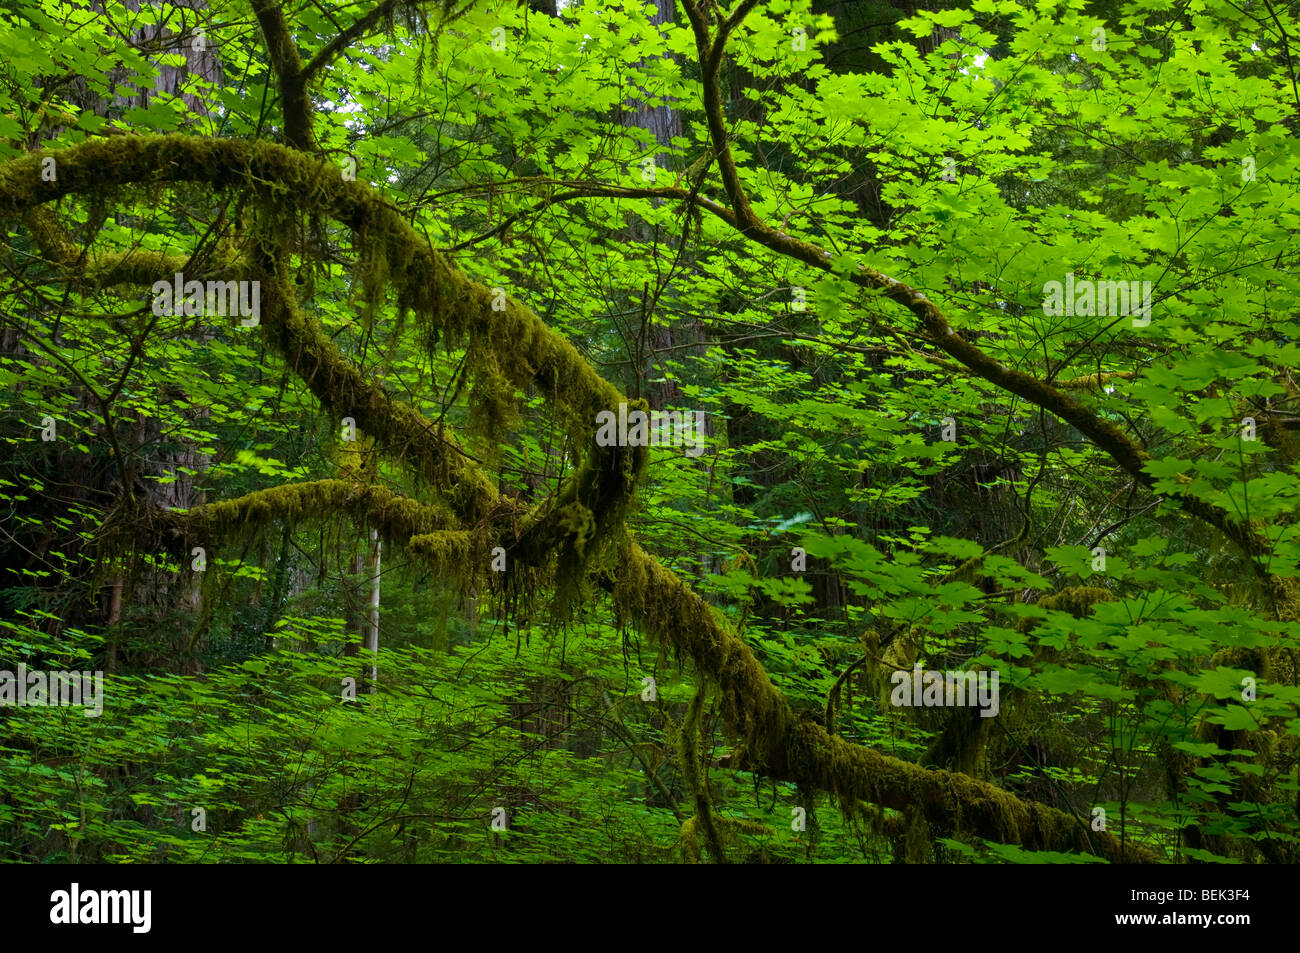 Vine Maple Tree in forest, Stout Grove, Jedediah Smith Redwoods State Park, California Stock Photo